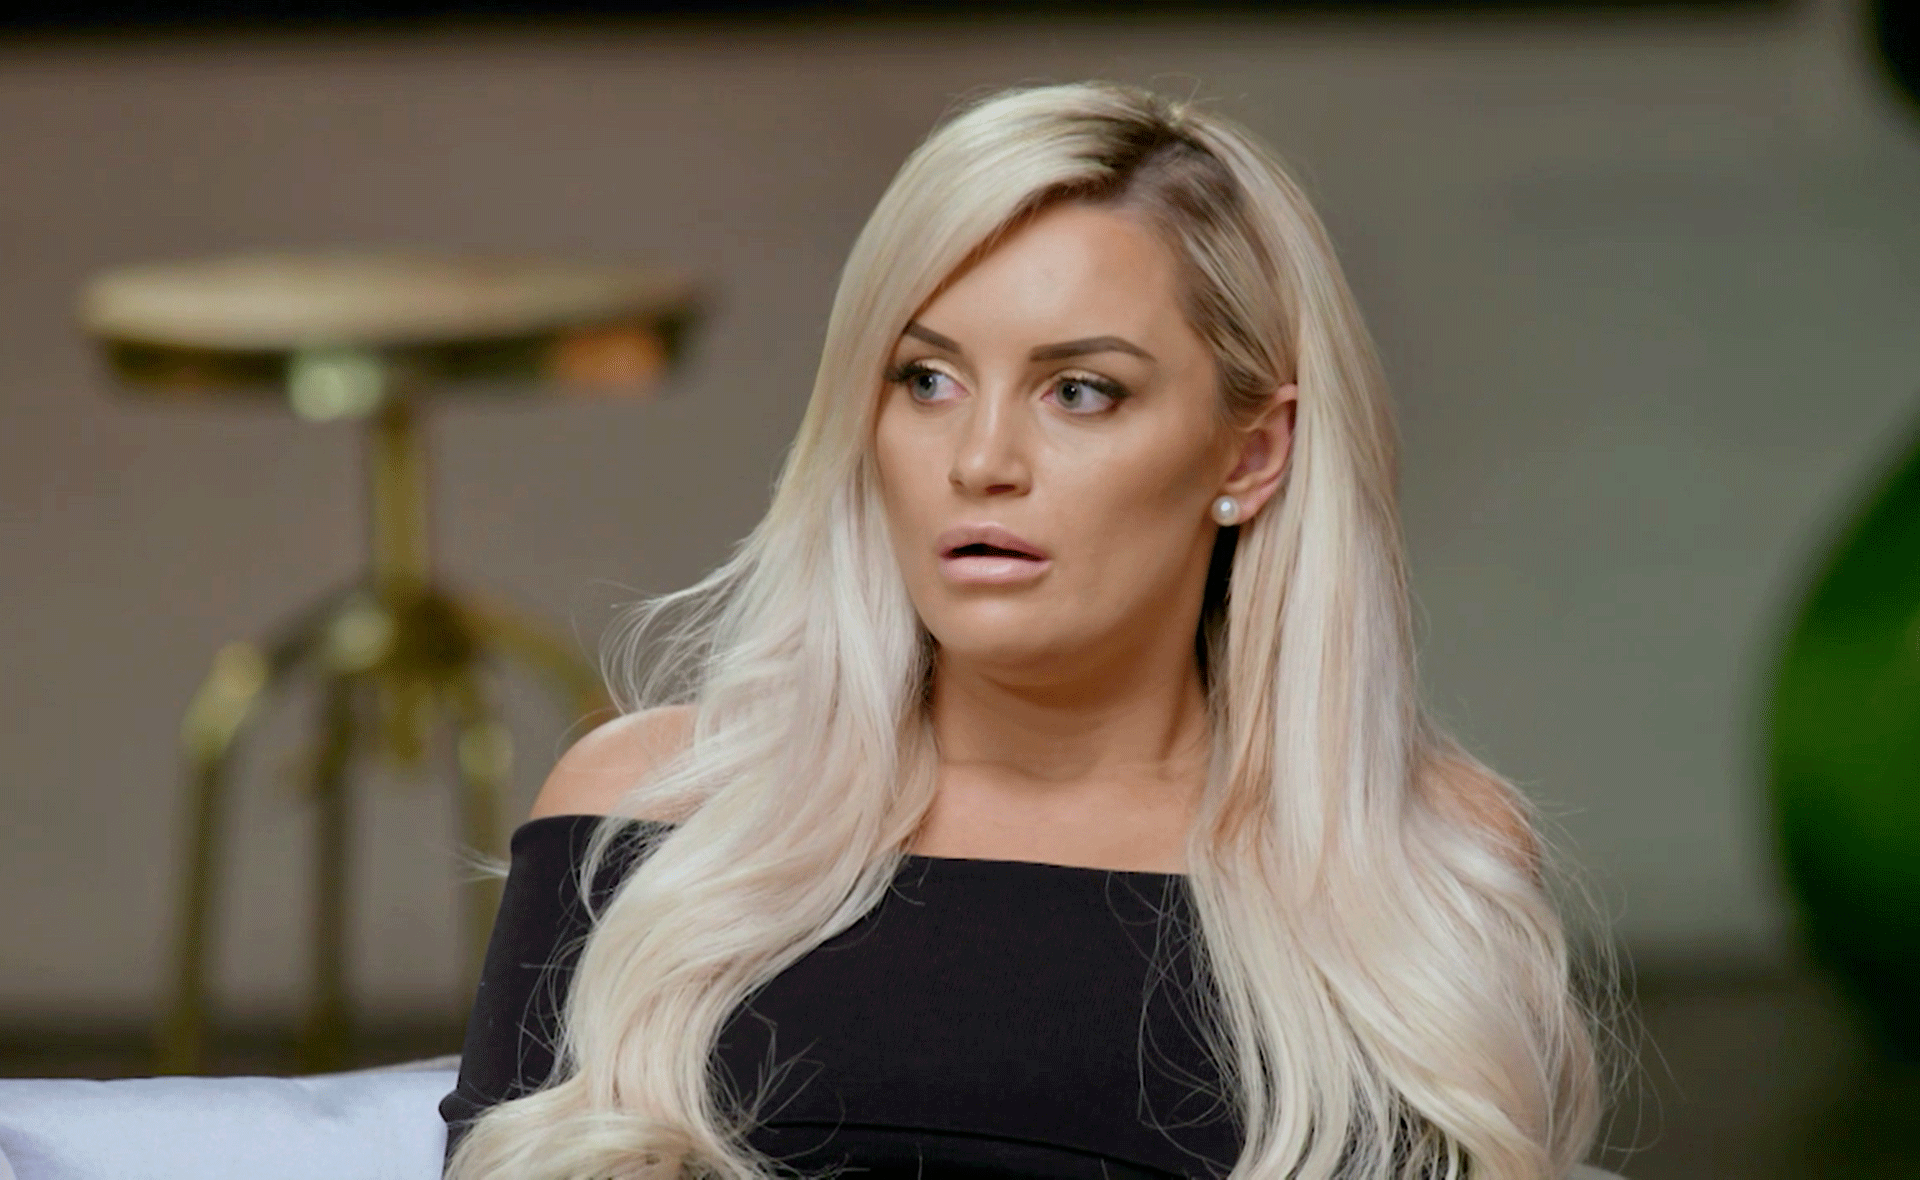 EXCLUSIVE: Married At First Sight’s Samantha spills on Bryce’s secret girlfriend